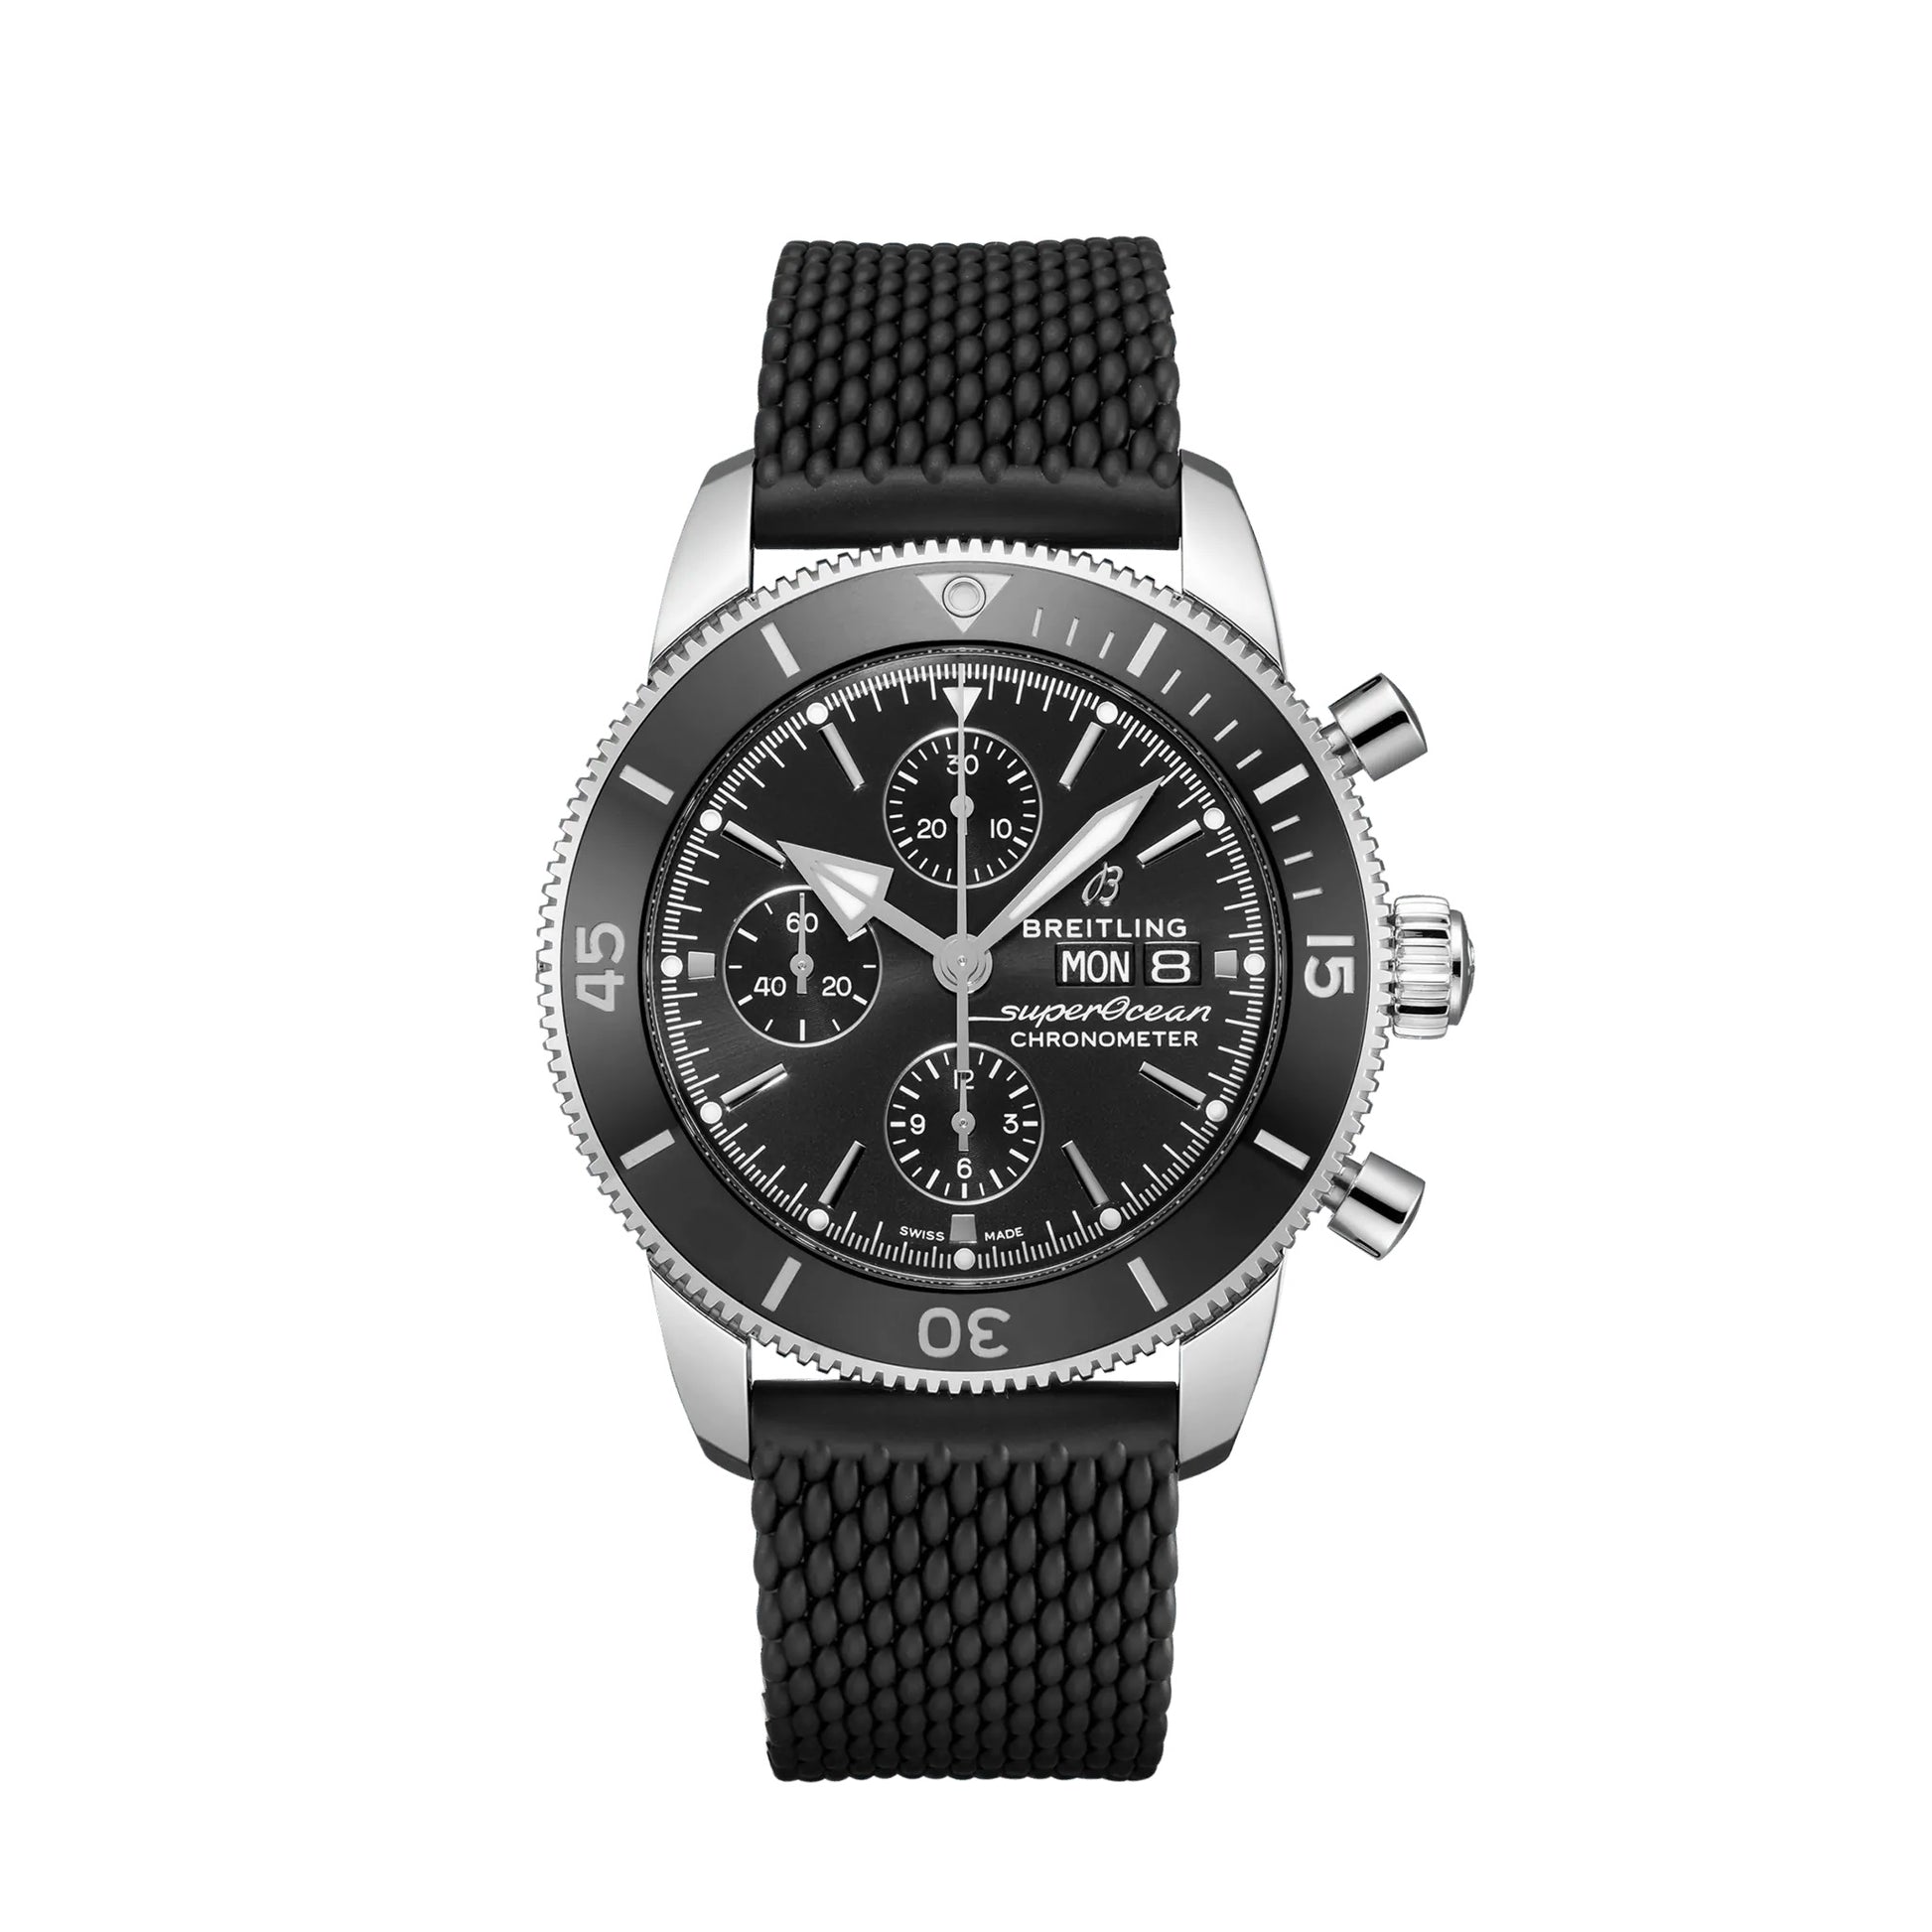 Superocean Heritage Chronograph 44, Ref# A13313121B1S1